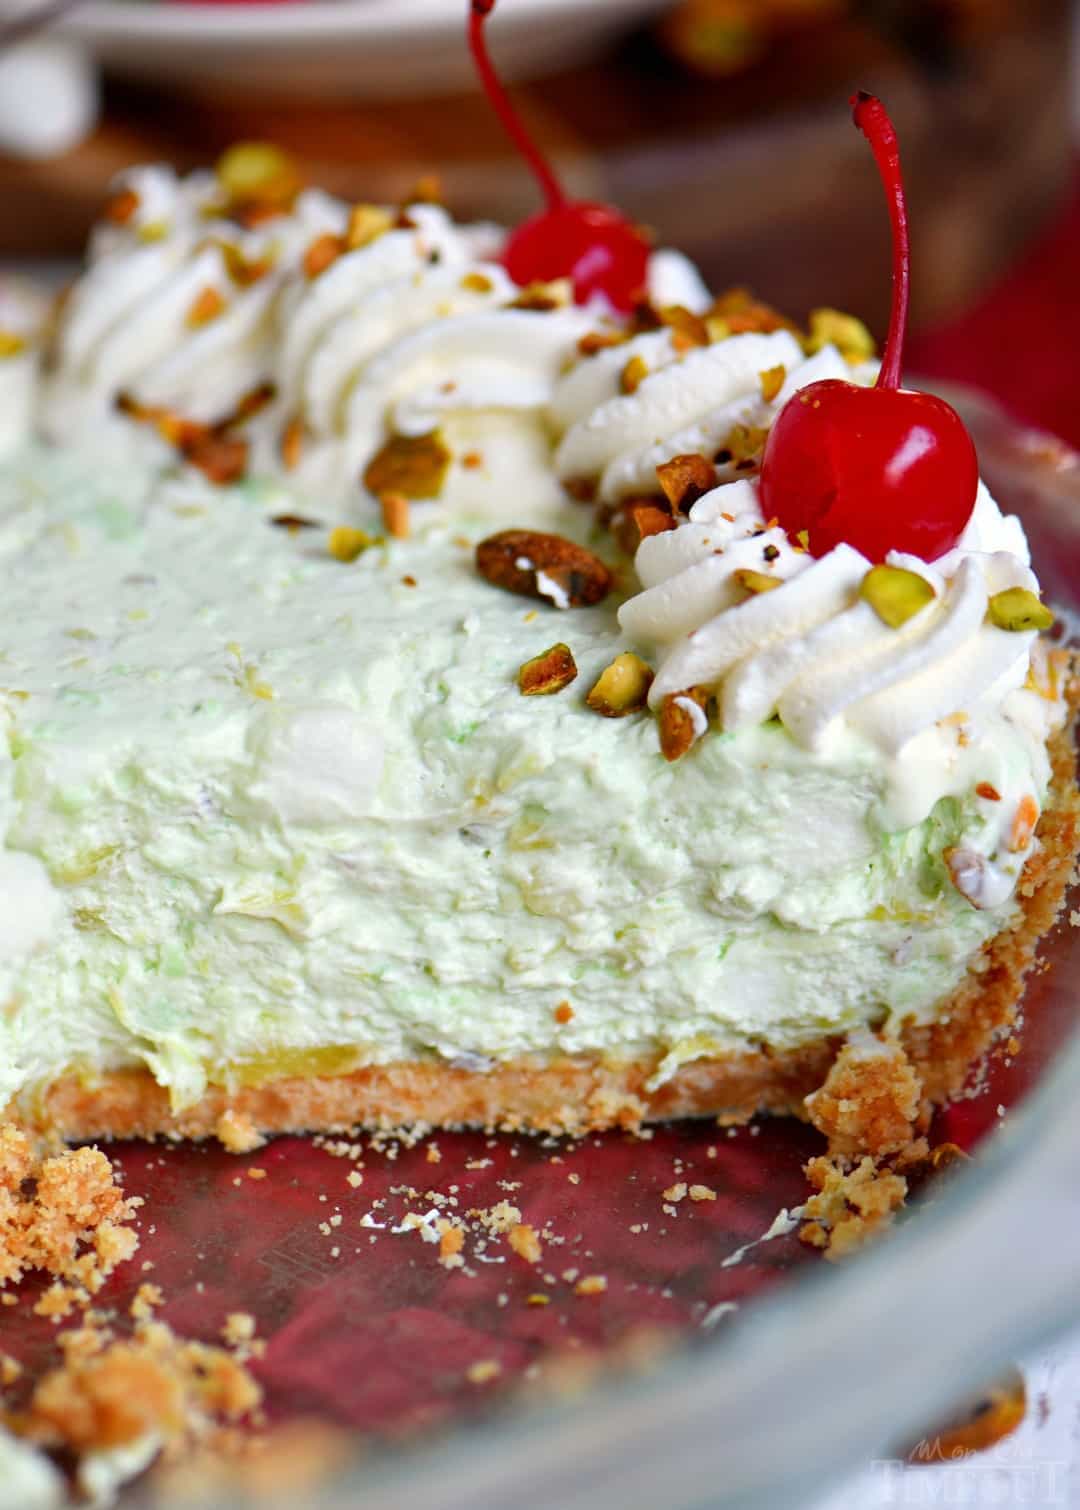 This easy Pistachio Pie recipe is a going to be hit with friends and family this holiday season! Creamy and delicious!